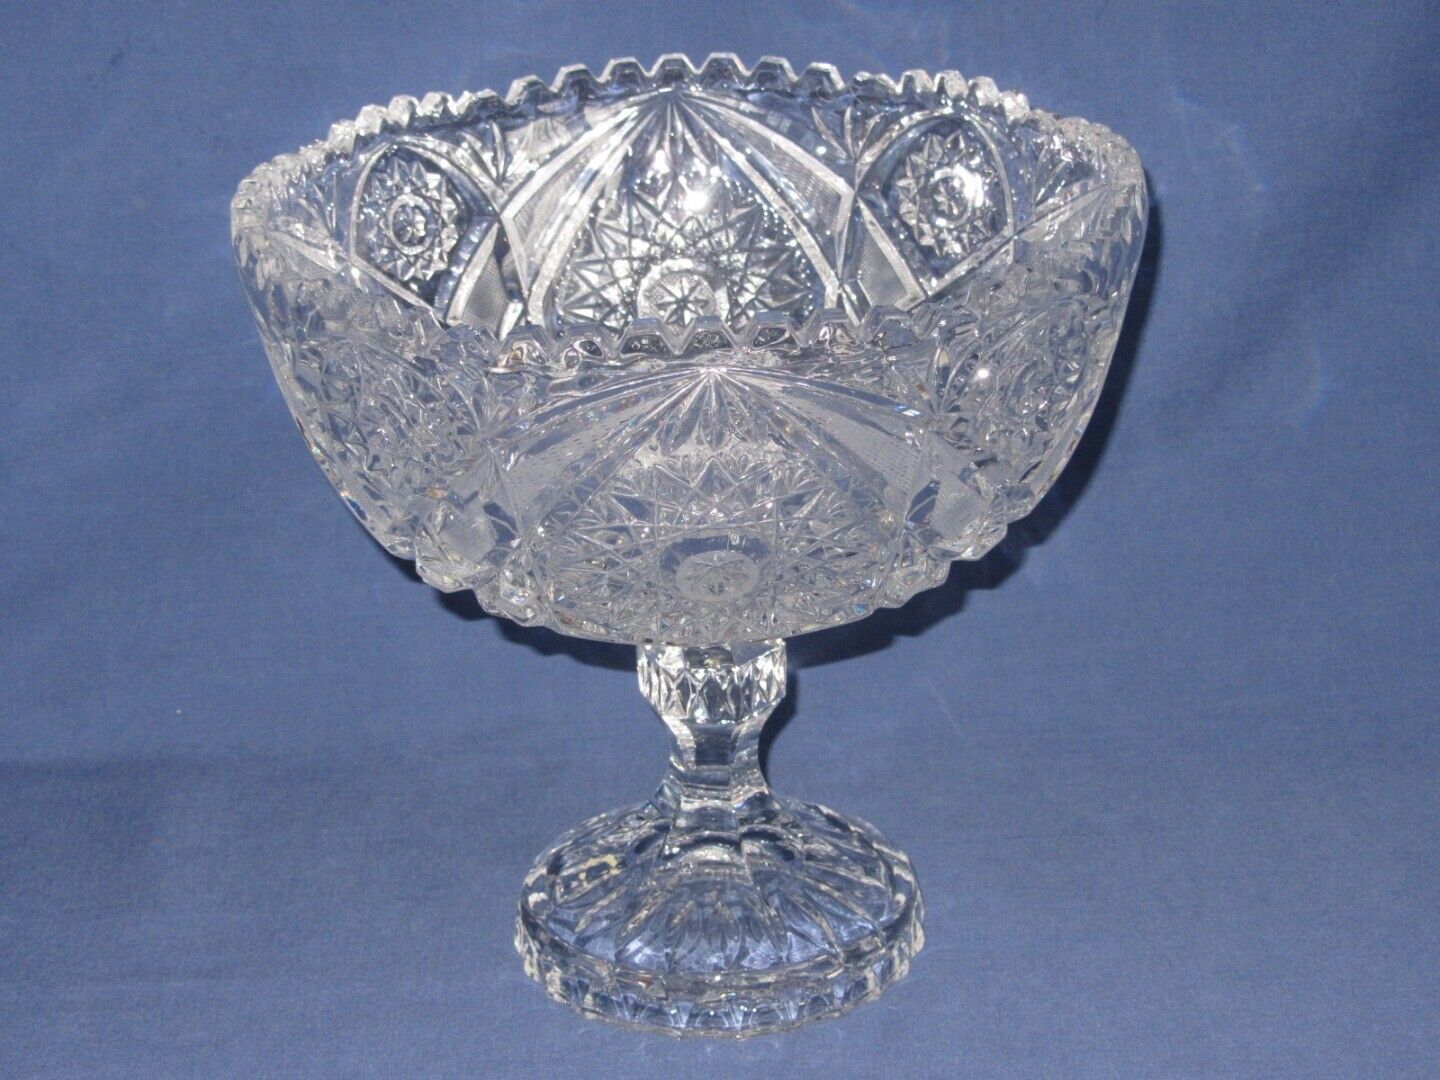 Primary image for Vintage Cut Crystal Pedestal Bowl Round Sawtooth Edge Clear